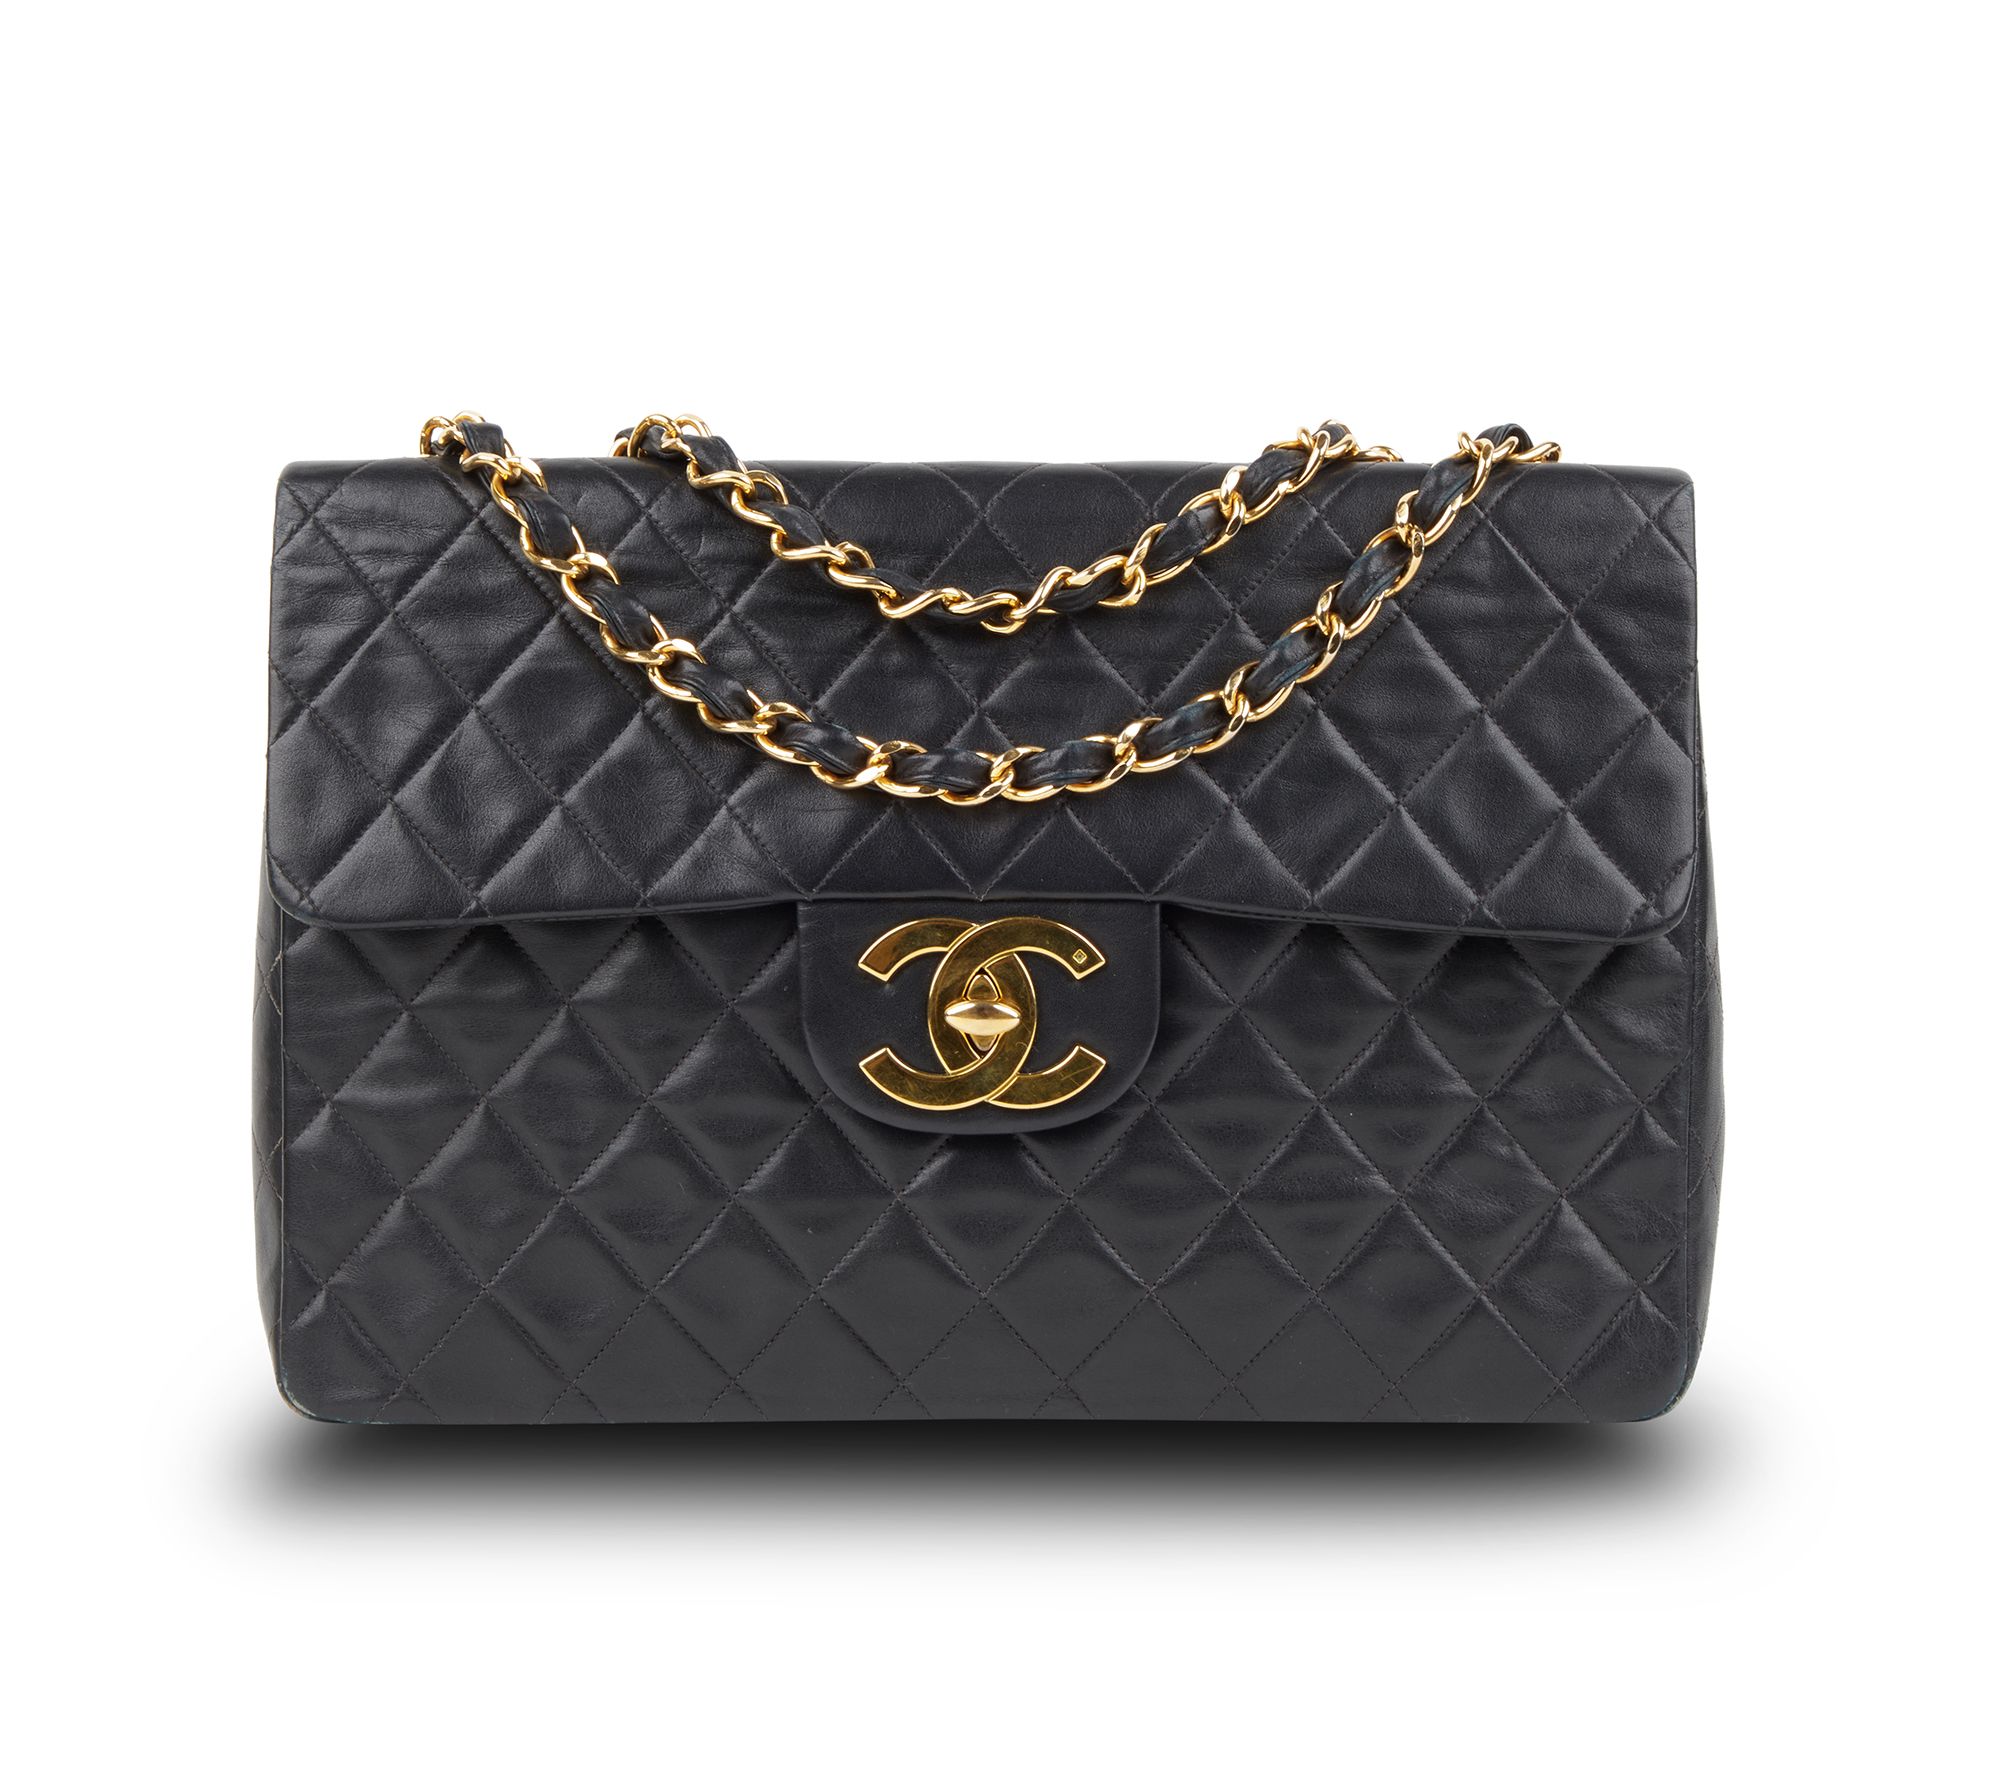 Chanel Caviar or Lambskin: Which one is better?